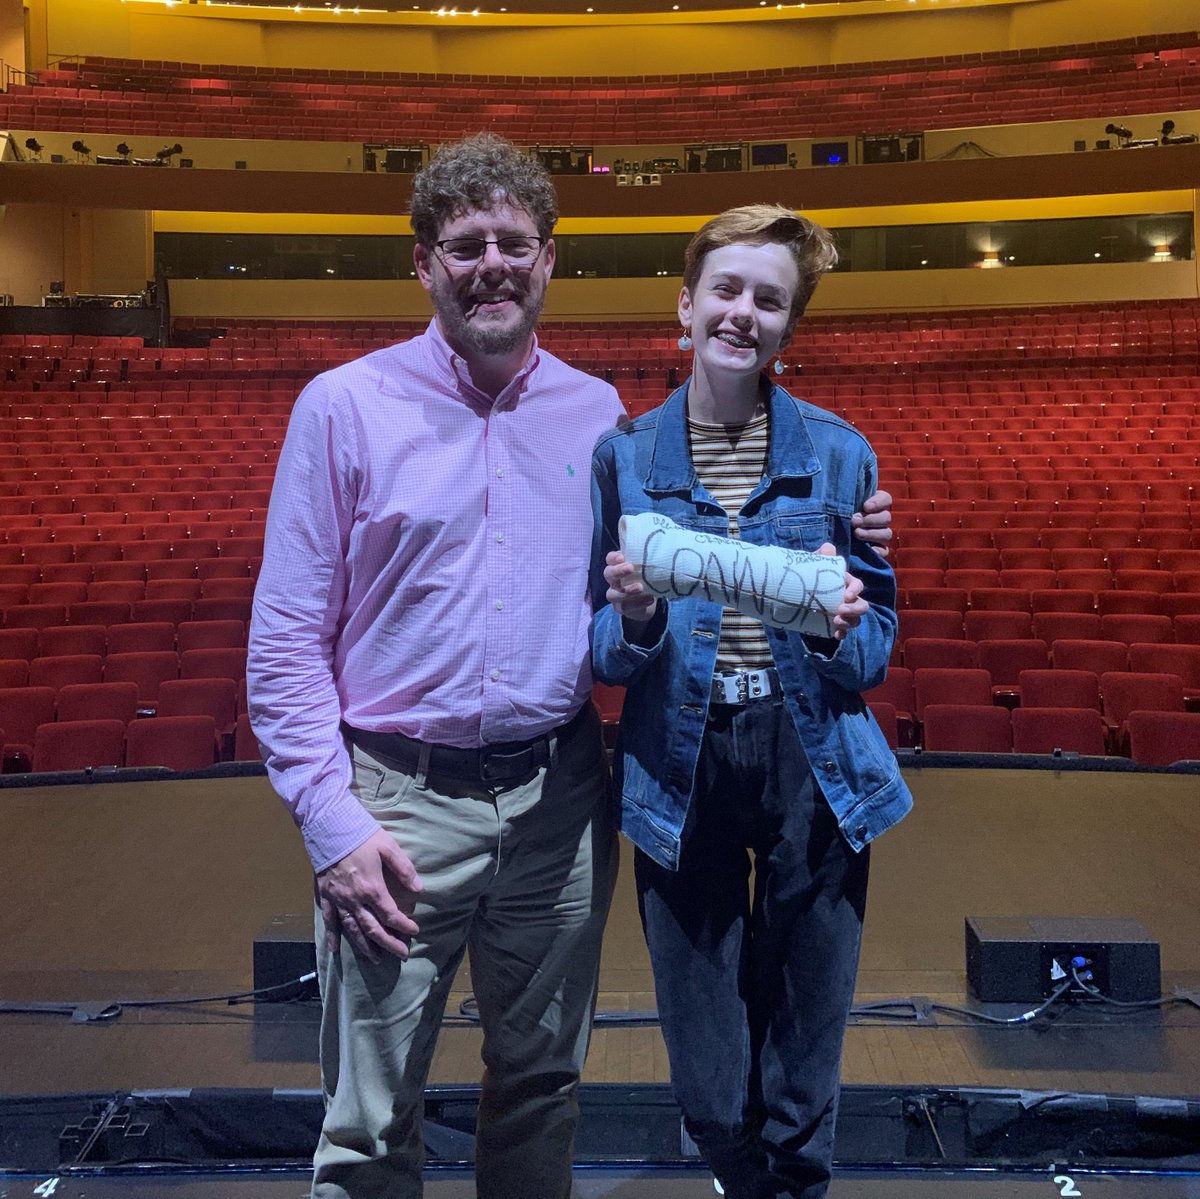 Last night in Louisville, Camille McCay became the millionth audience member to attend the #DEHtour. To celebrate, she and her dad David were invited backstage at the @kentuckycenter for a VIP visit with the cast. #DearEvanHansen